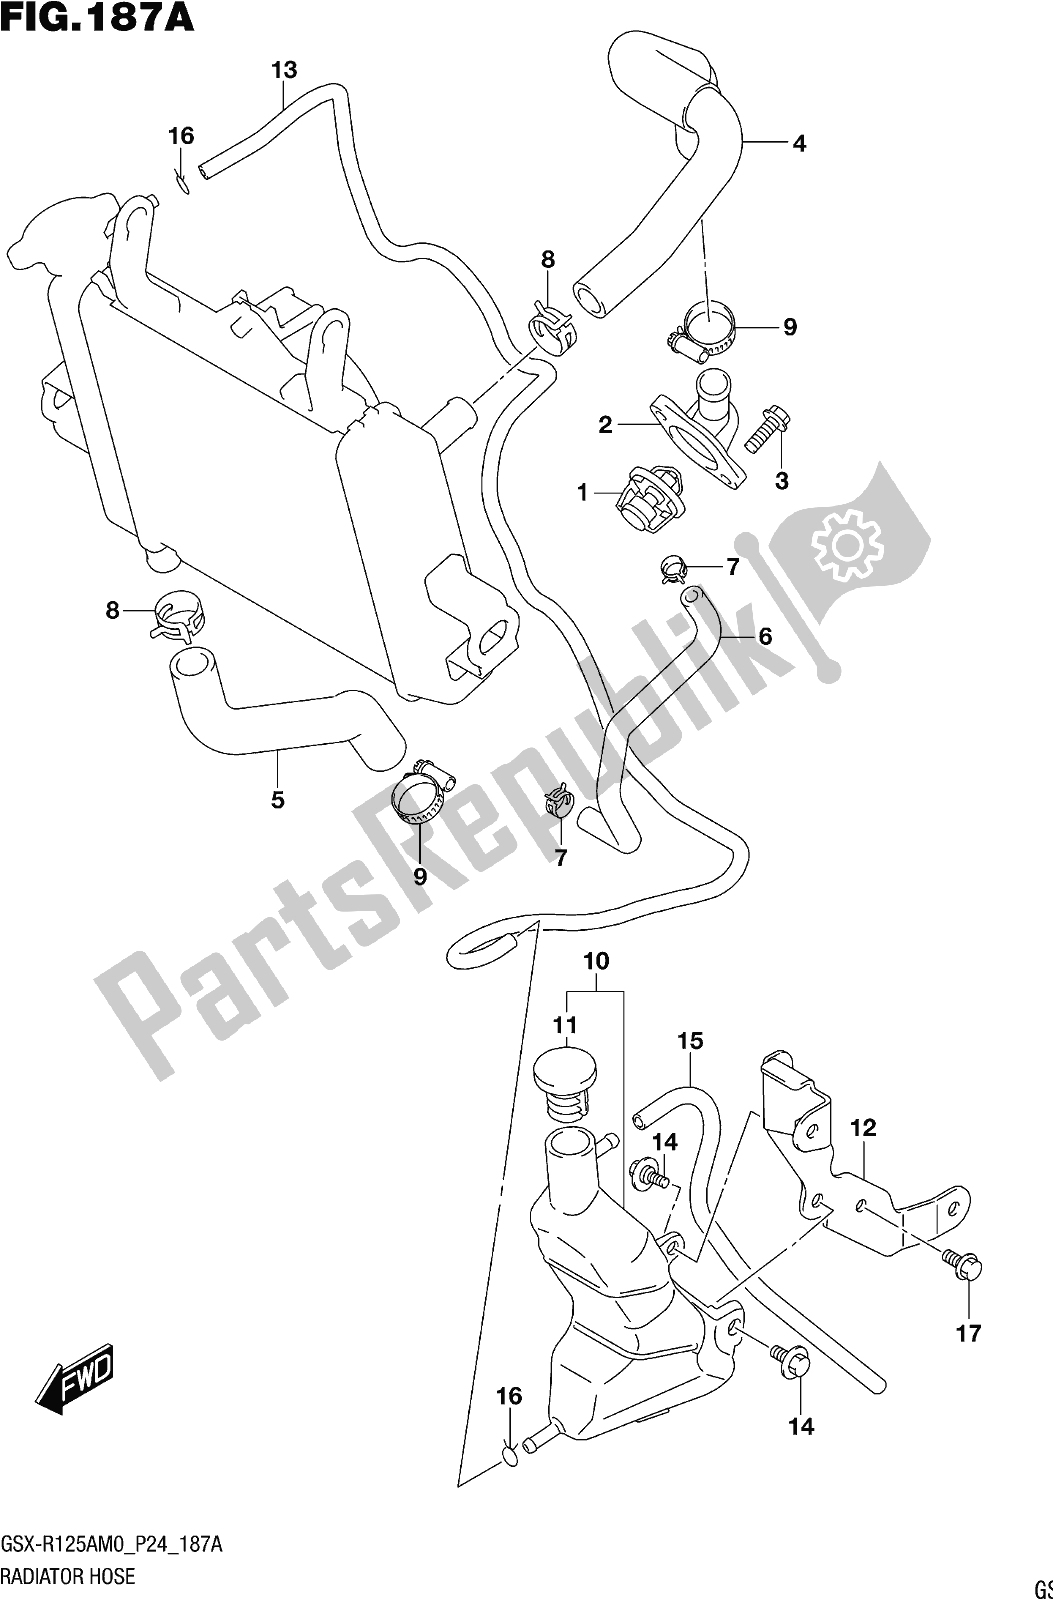 All parts for the Fig. 187a Radiator Hose of the Suzuki Gsx-r 125A 2020